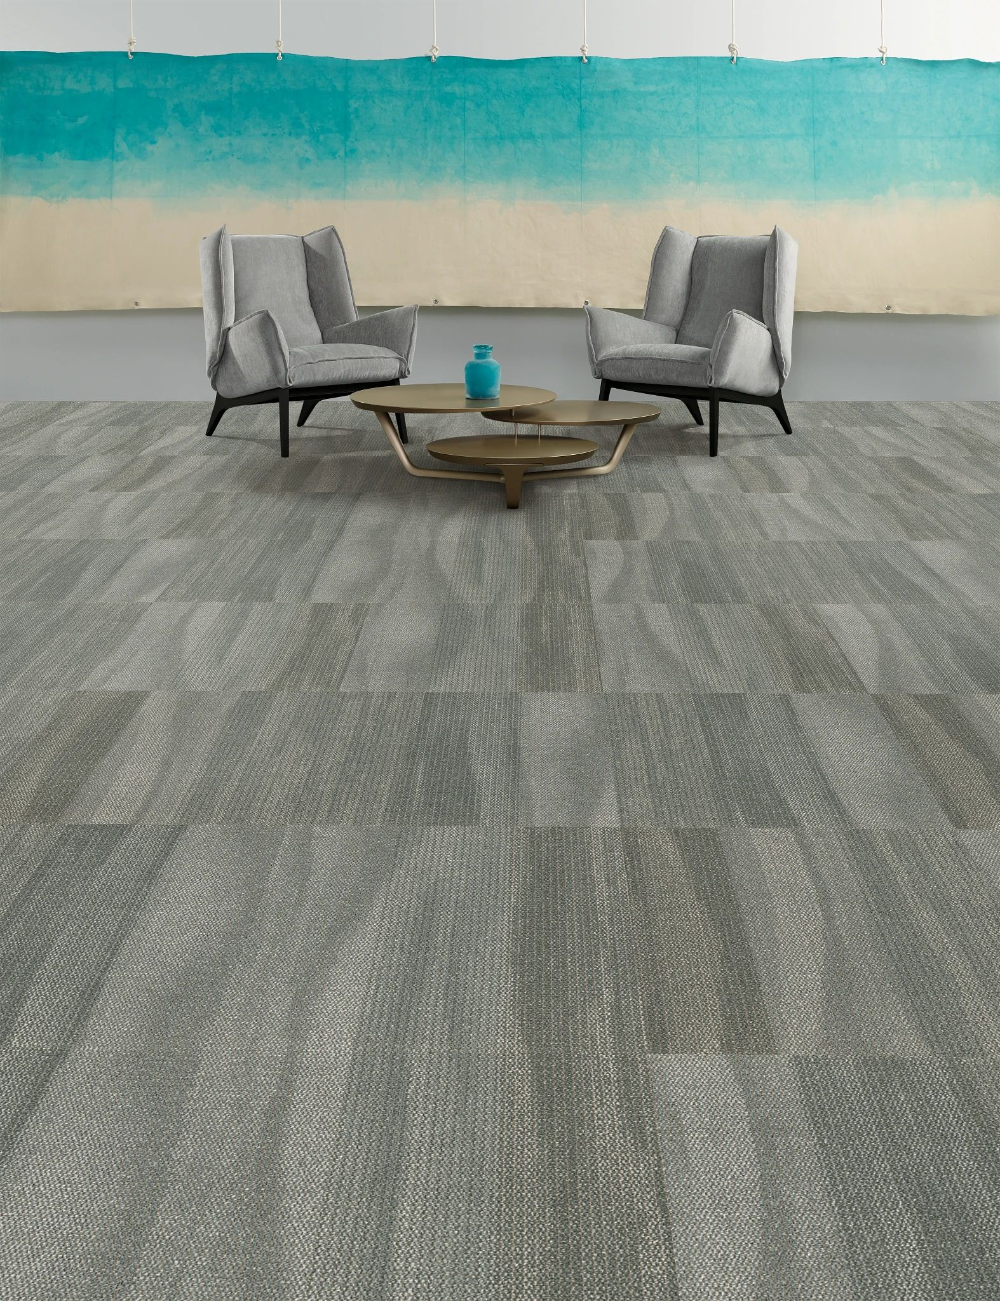 The Benefits of Commercial Carpet Square
Tiles for Your Business